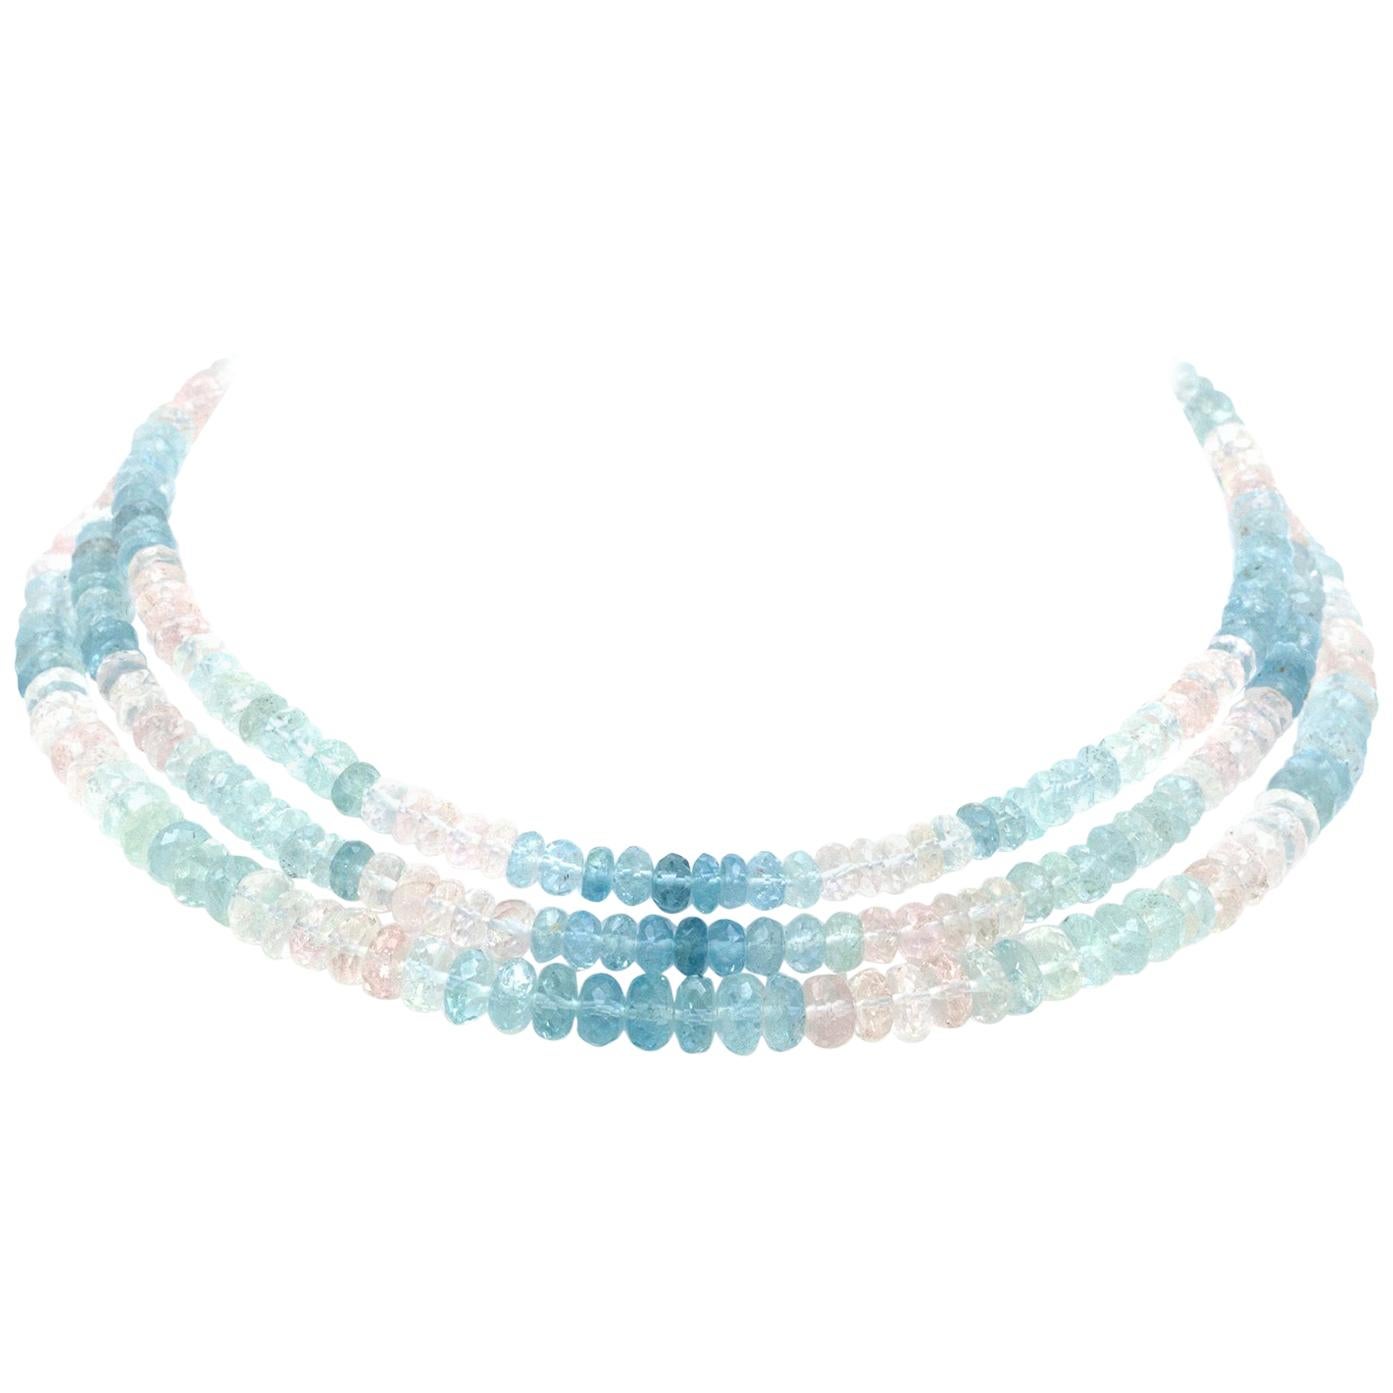 300 Carat Aquamarine and Pink Topaz 3 Strand Necklace For Sale